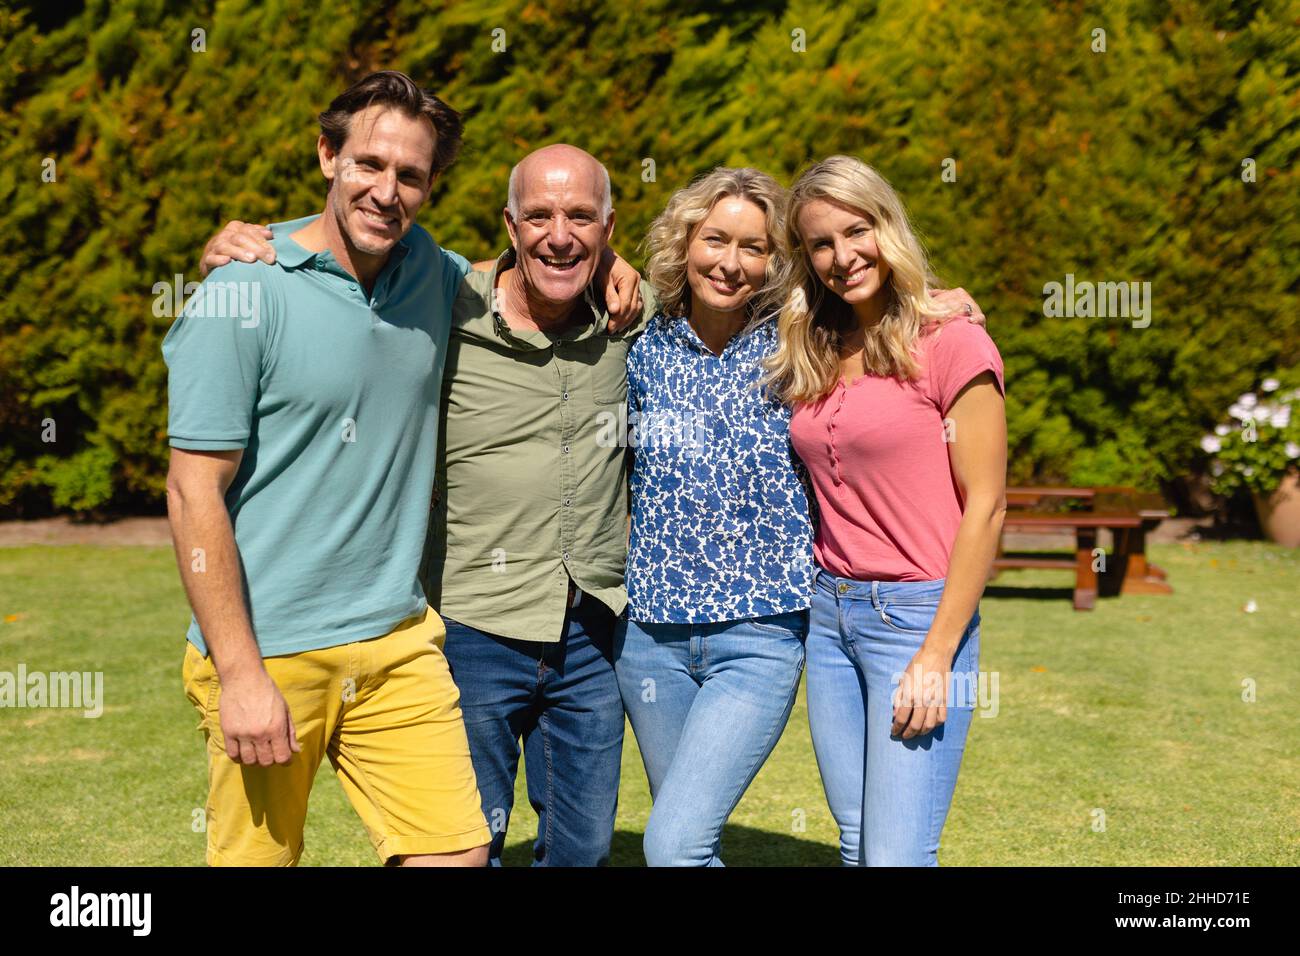 Portrait of caucasian two generation family smiling while standing together in the garden Stock Photo